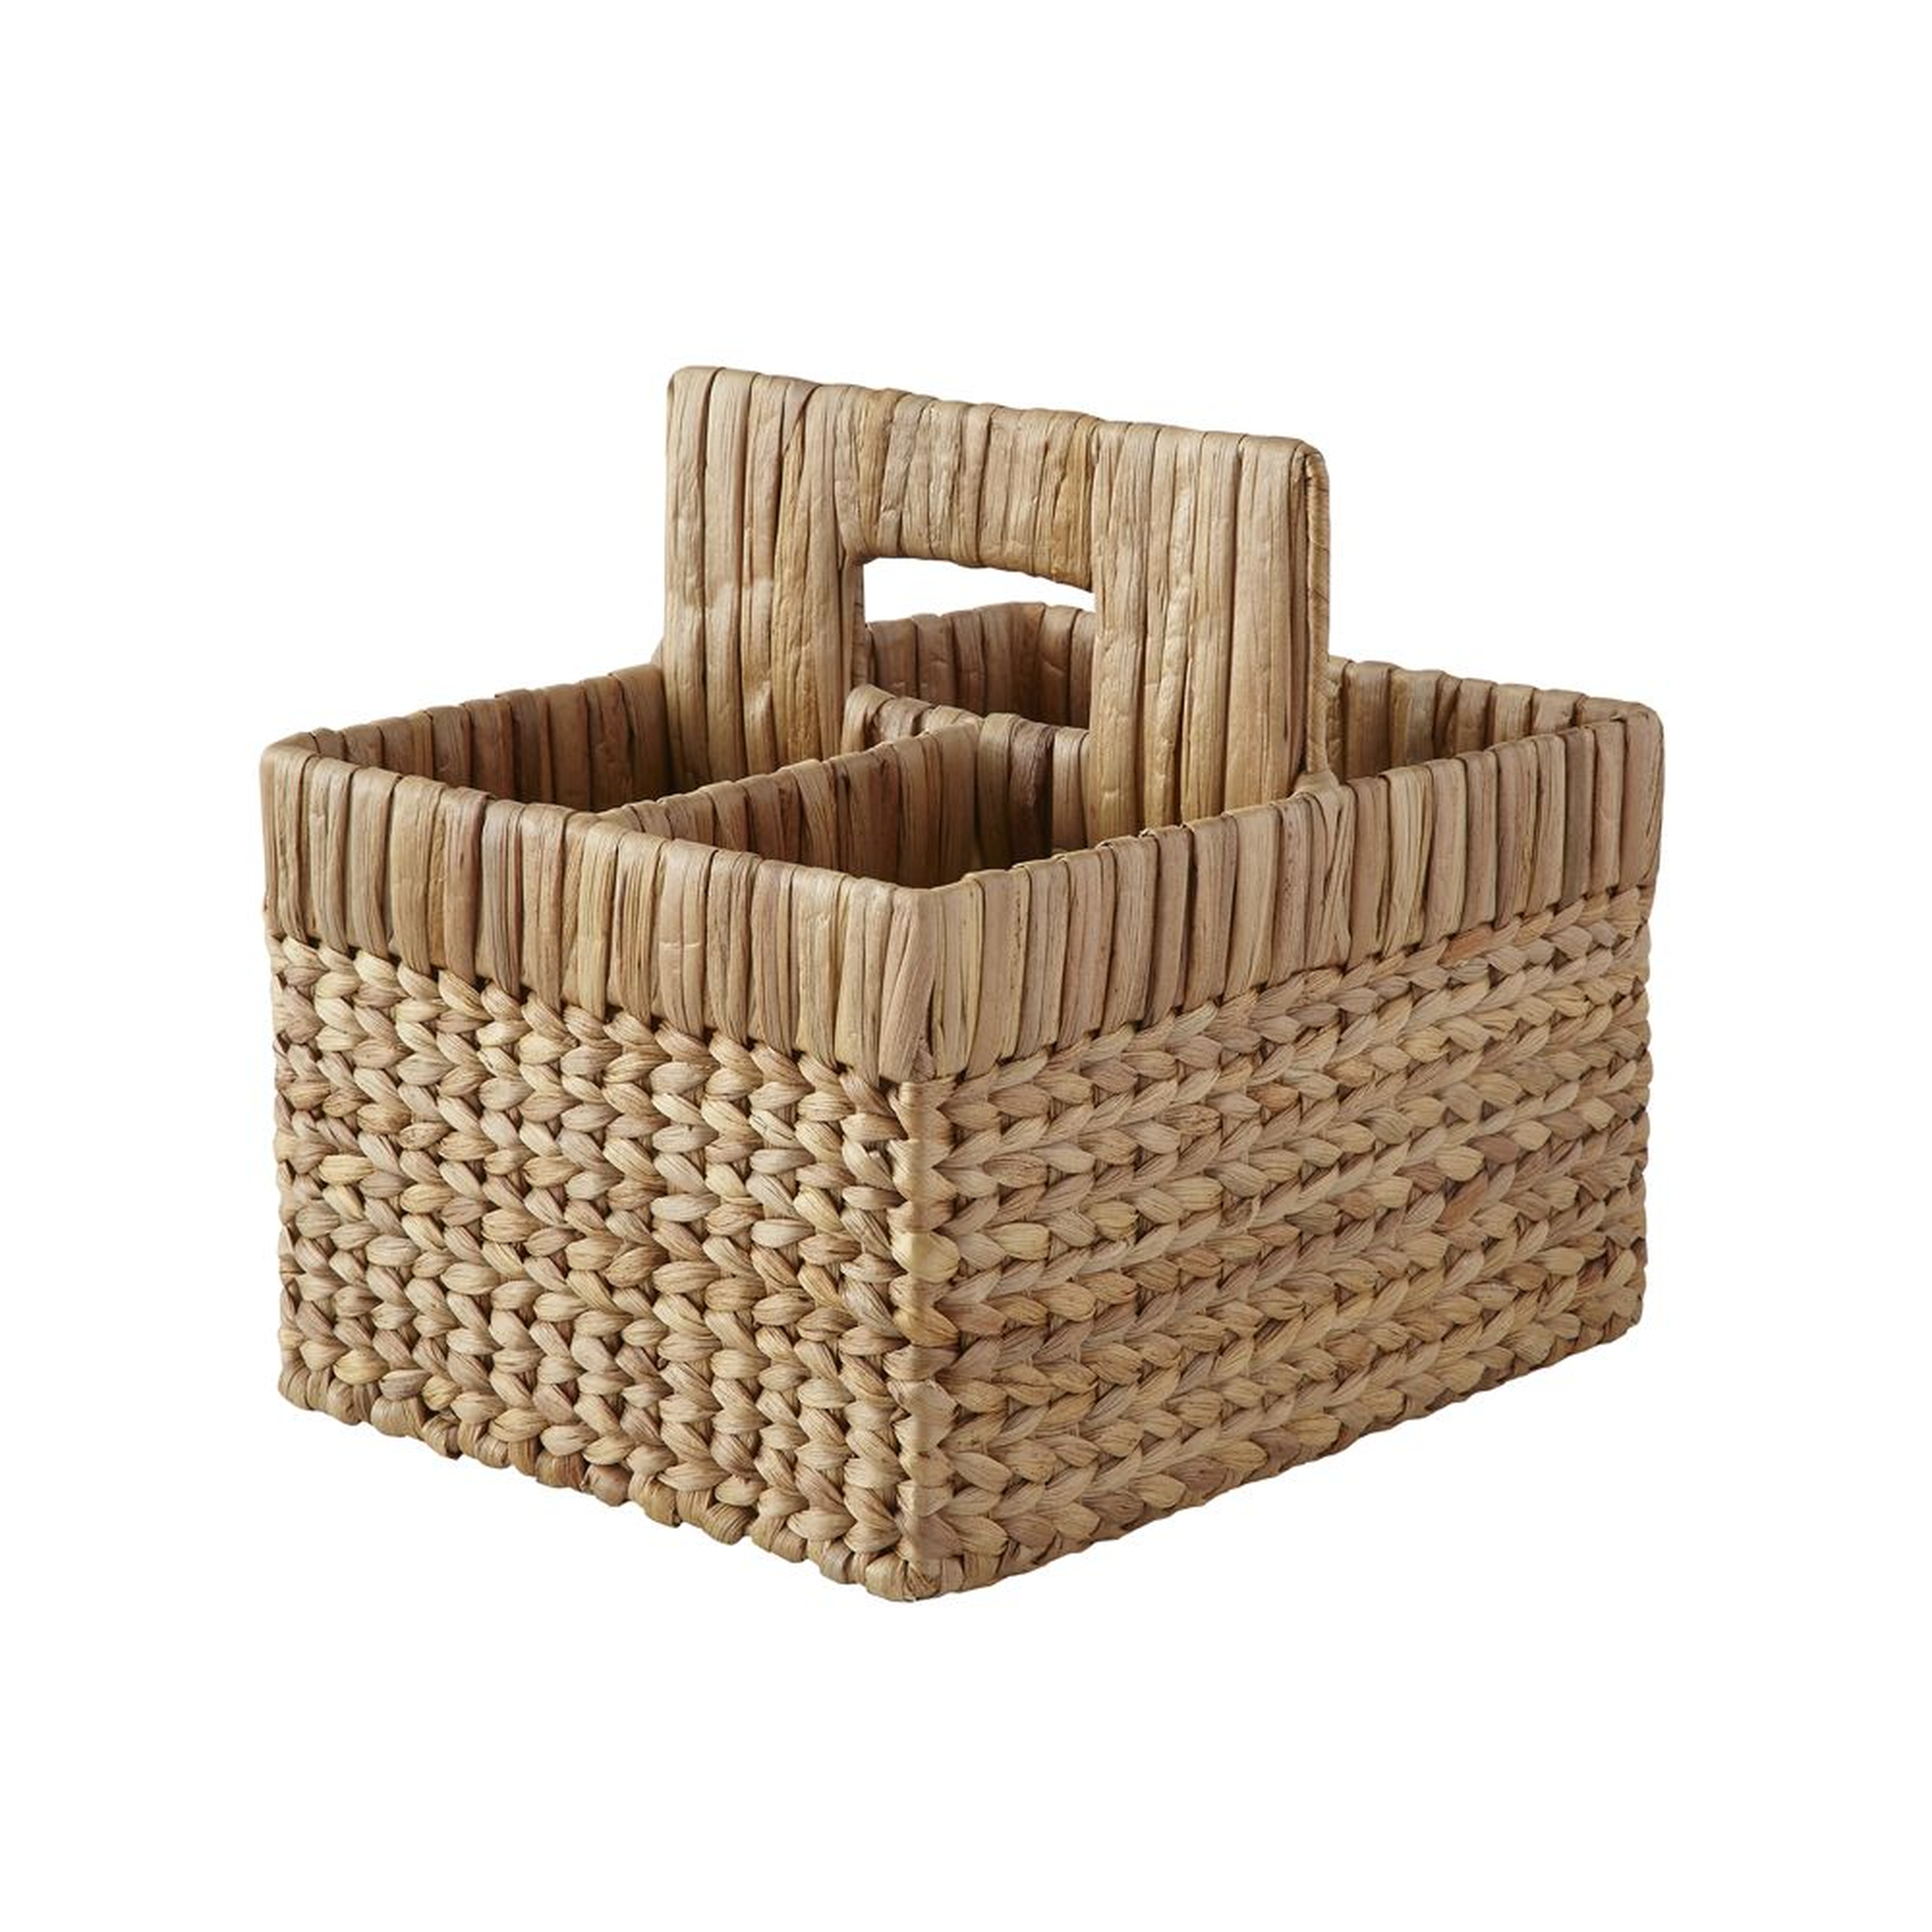 Natural Woven Wicker 3-Compartment Diaper Caddy with Handles - Crate and Barrel